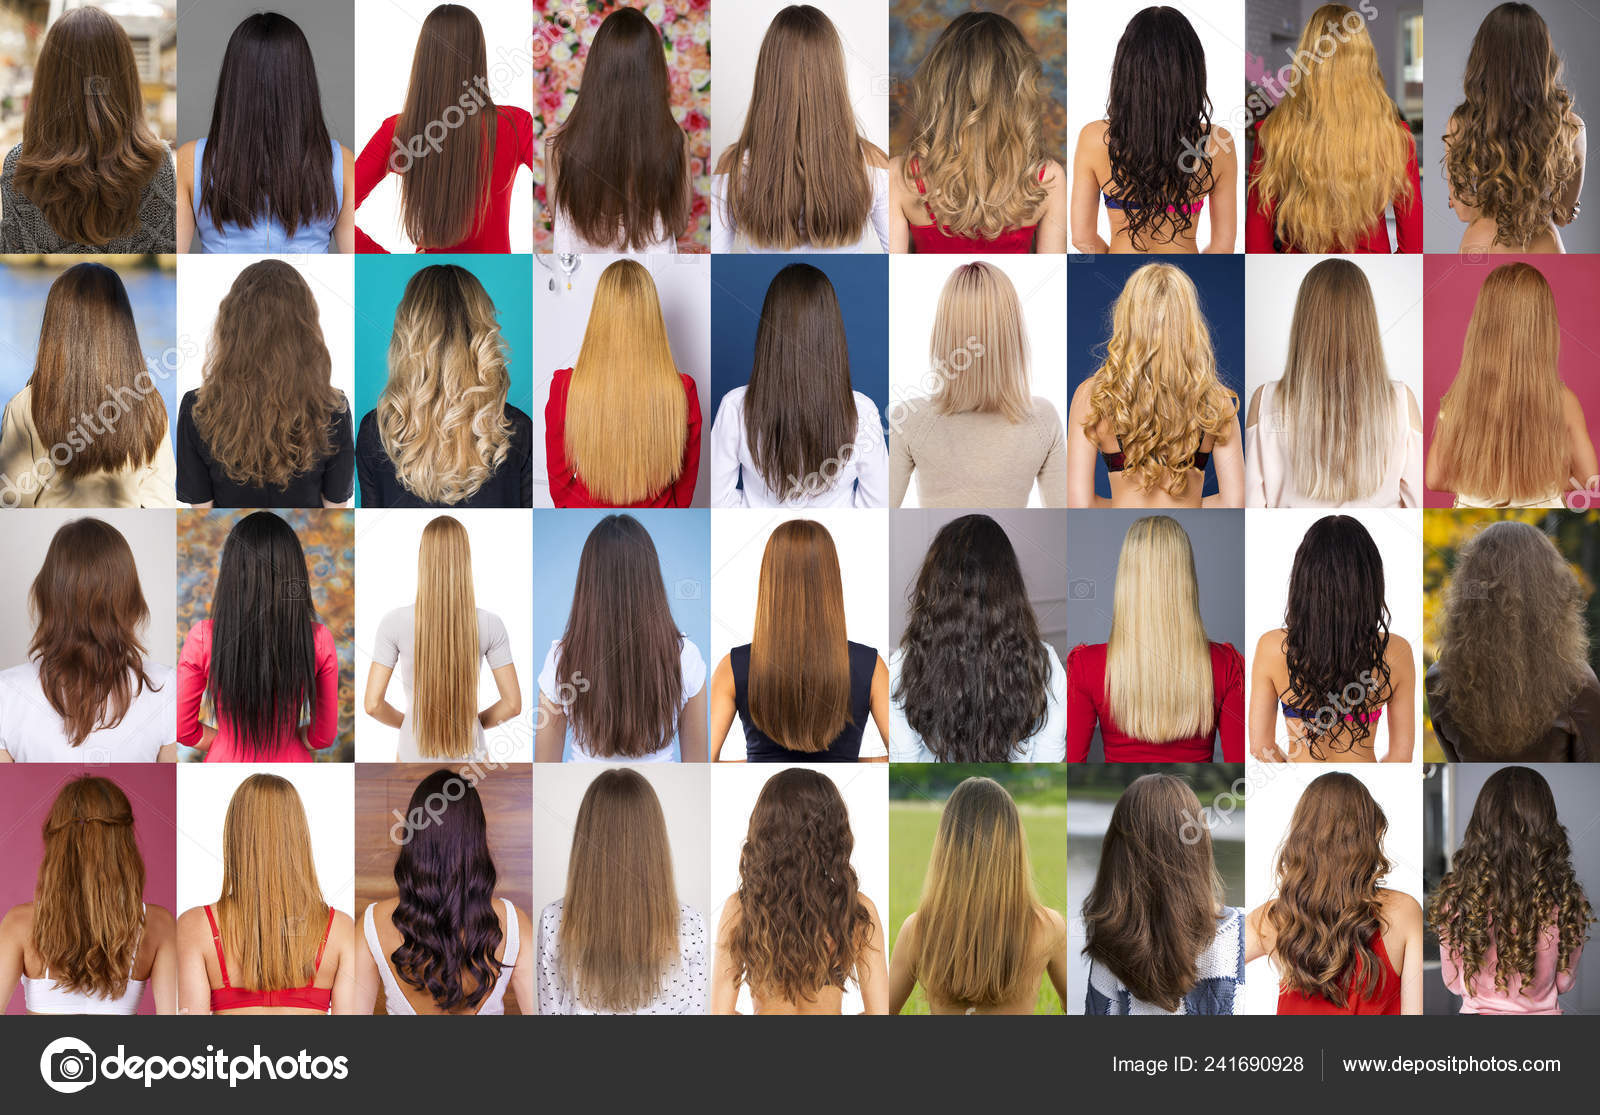 Different hairstyles Stock Photos, Royalty Free Different hairstyles Images  | Depositphotos